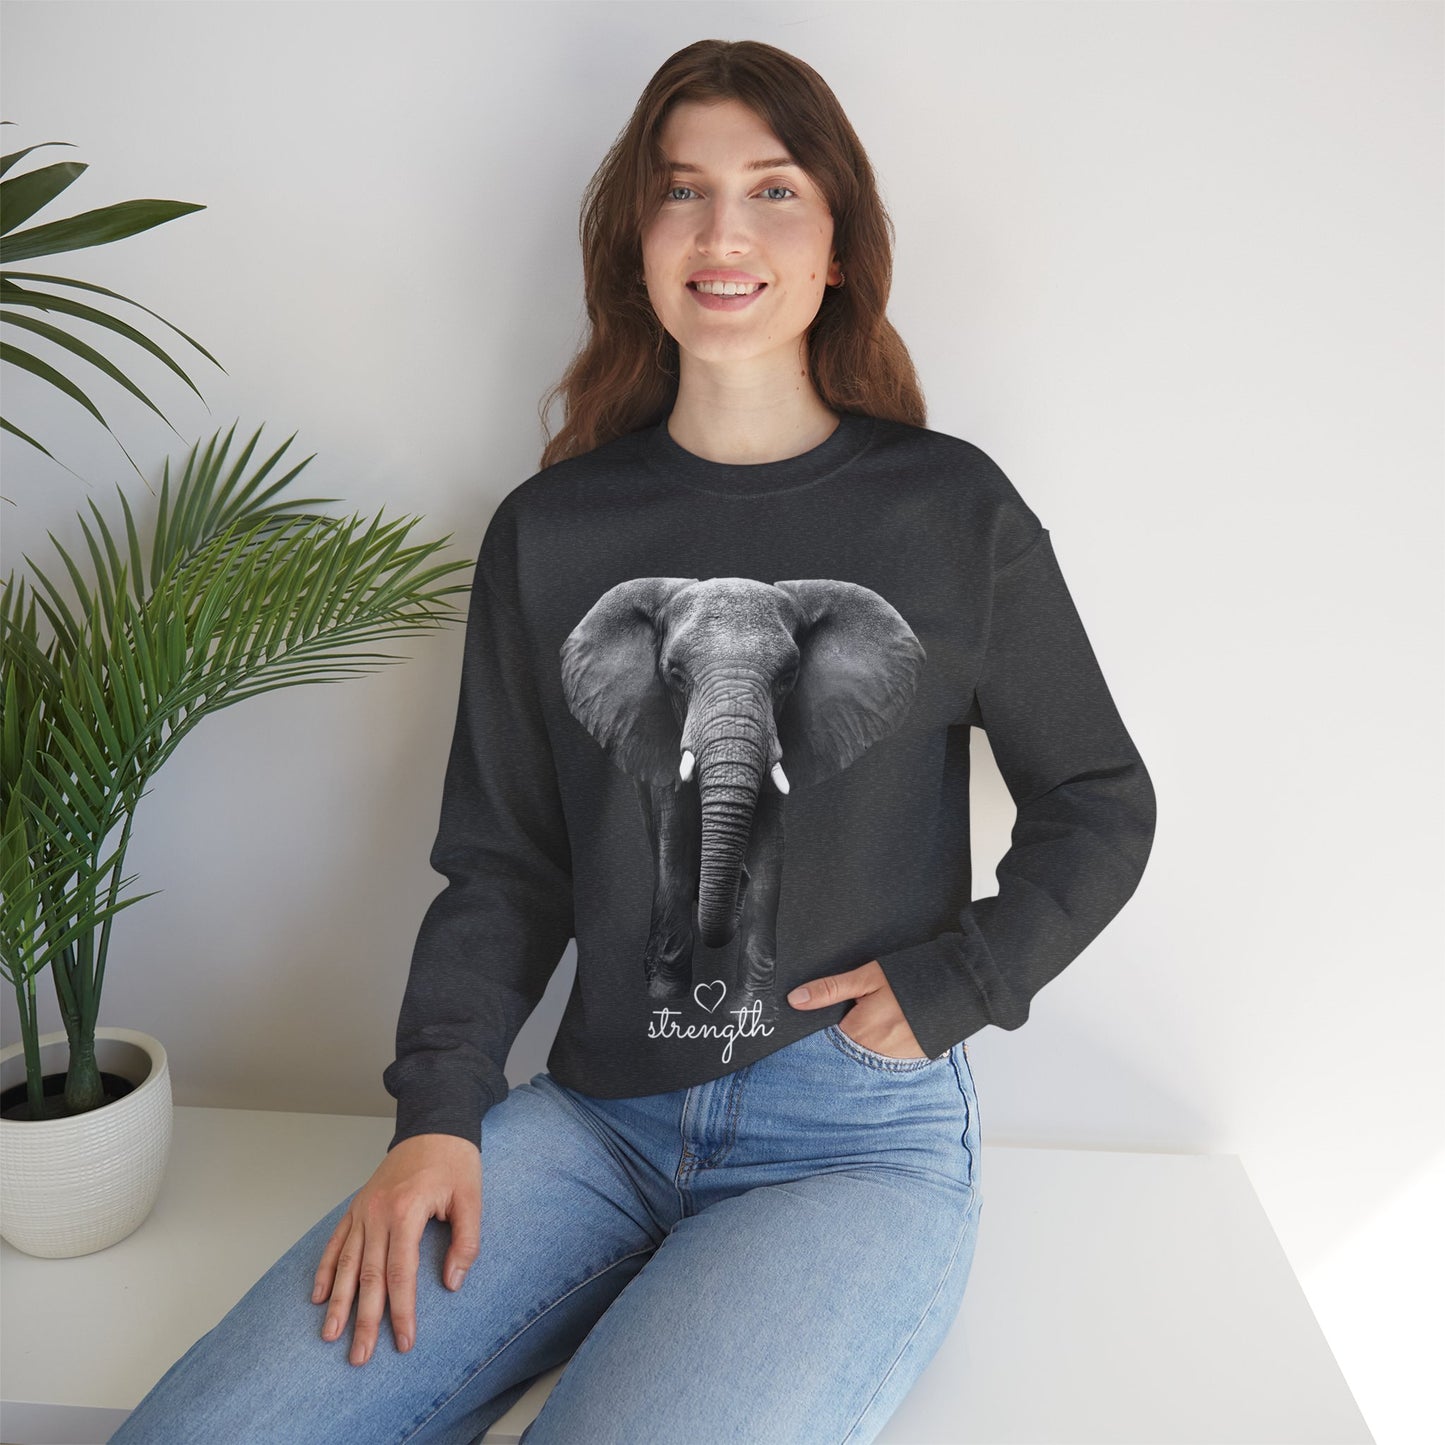 Elephant lover? Then this is the Sweatshirt for you. Give the gift of this Unisex Heavy Blend™ Crewneck Sweatshirt or get one for yourself.